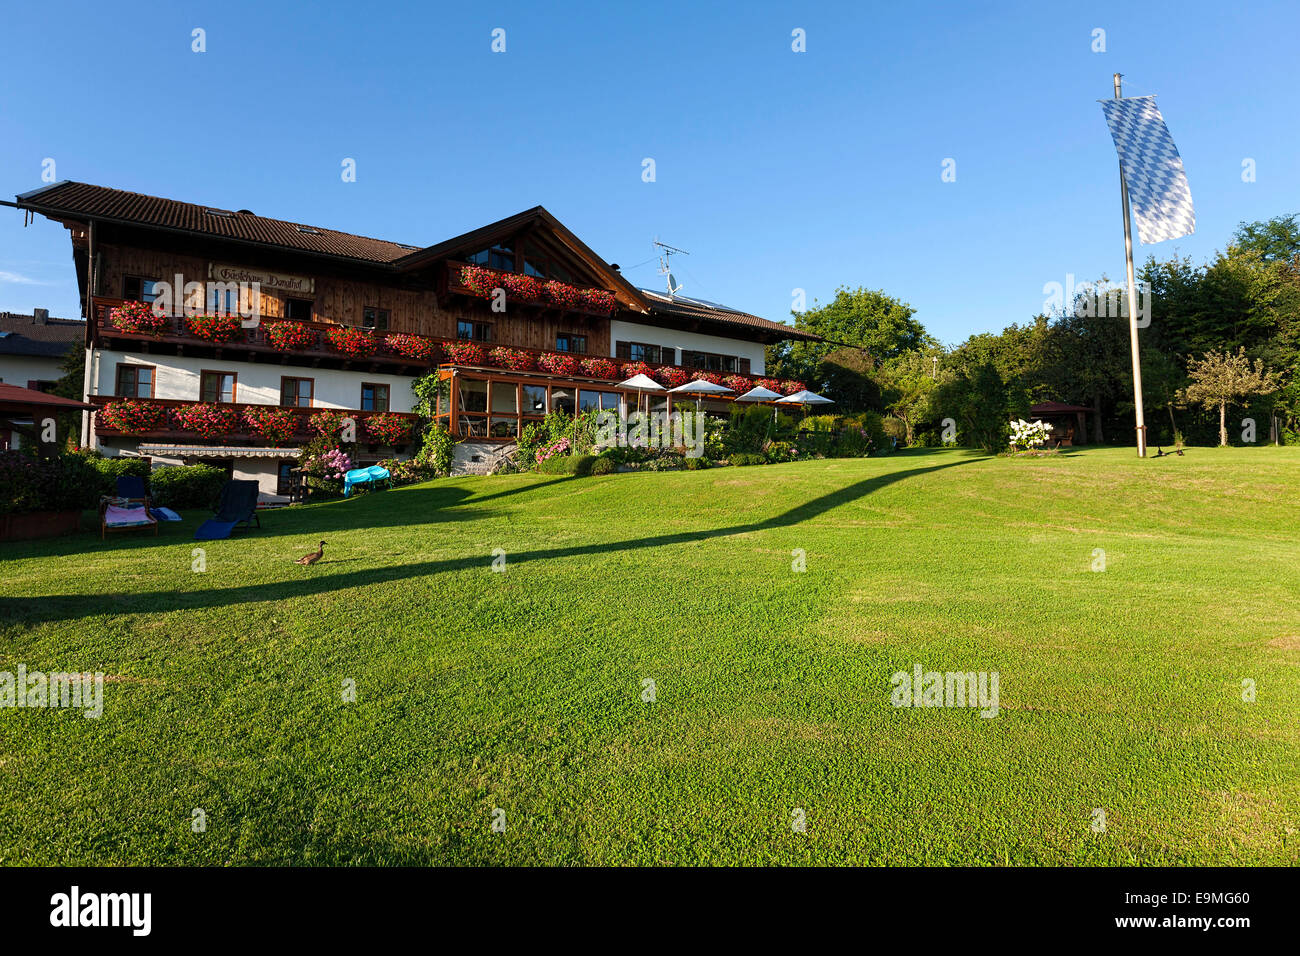 German holiday Guest house, Chiemsee, Chiemgau, Breitbrunn, Upper Bavaria, Germany, Europe Stock Photo